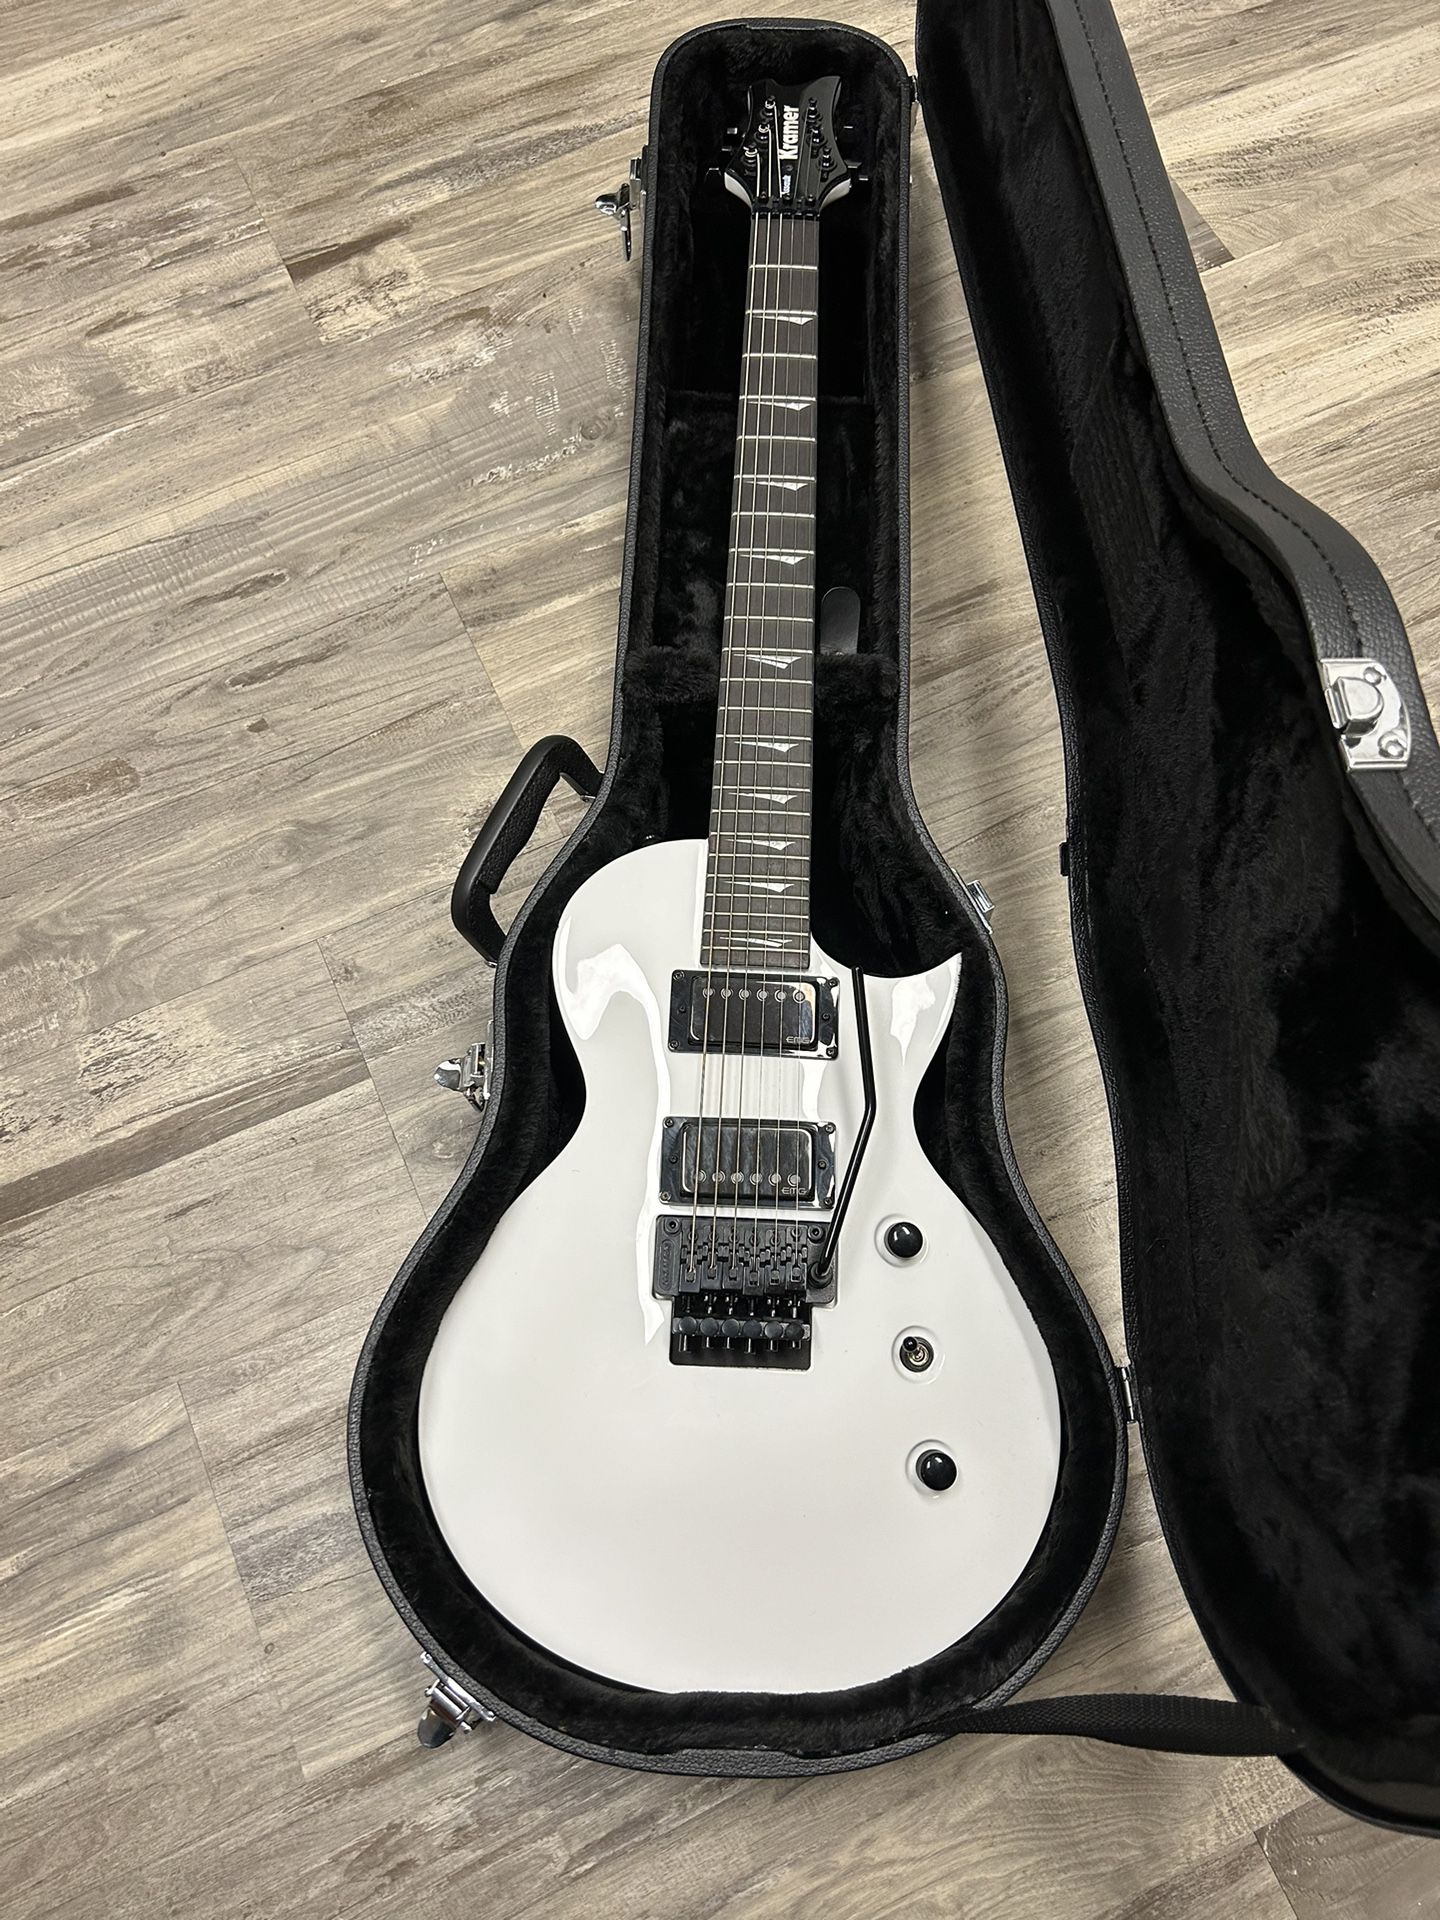 Used Kramer Assault 220 Solid Body Electric Guitar With JH EMG Activate Pickups And Licensed Floyd Rose Tremolo System 